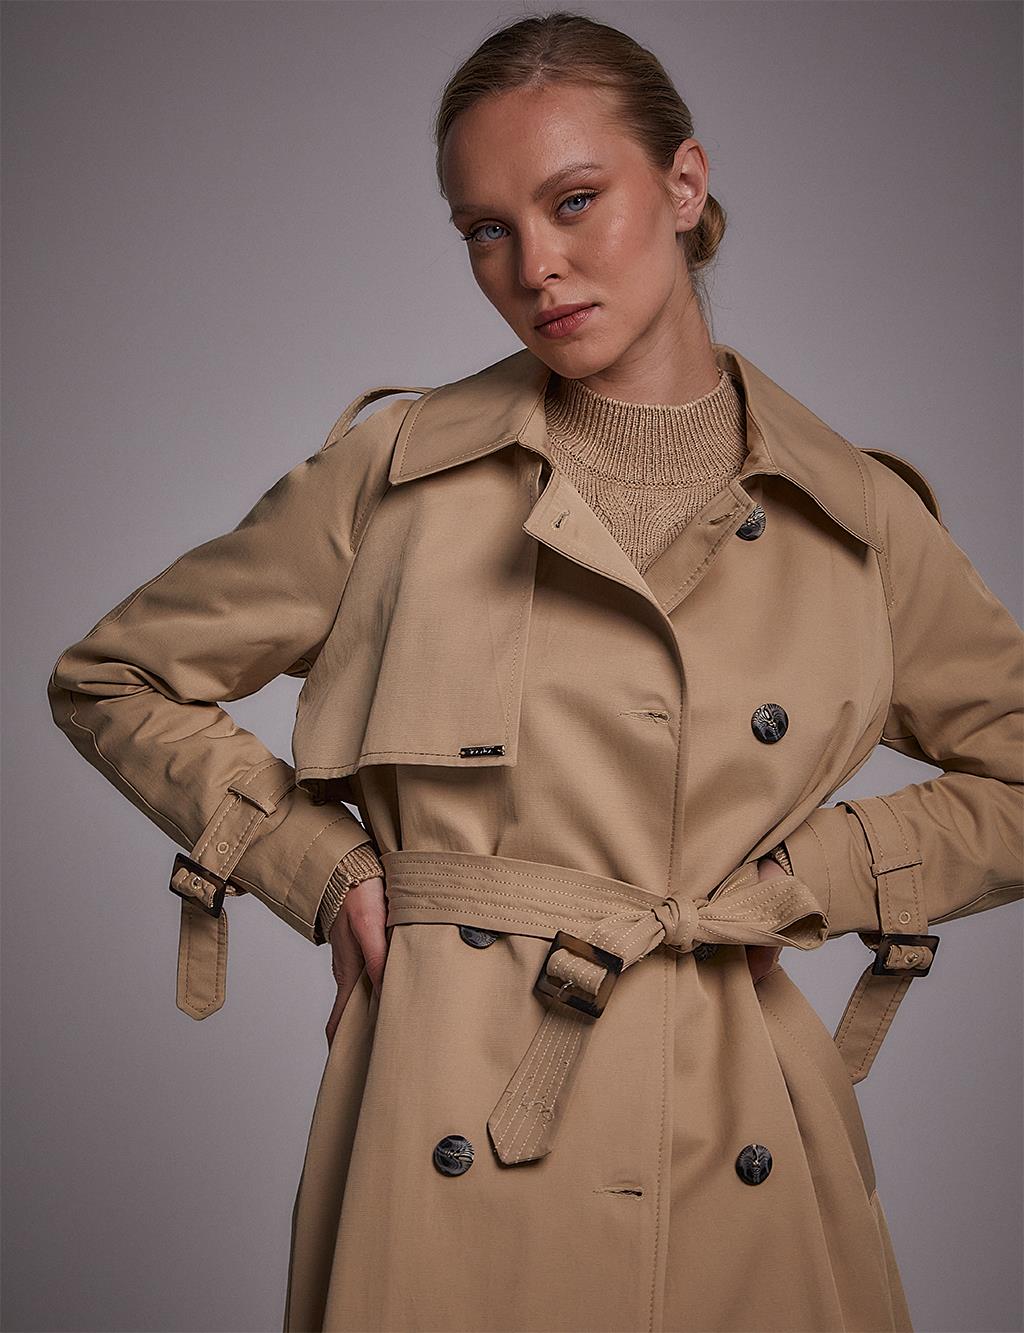 Belted Double Breasted Trench Coat Beige